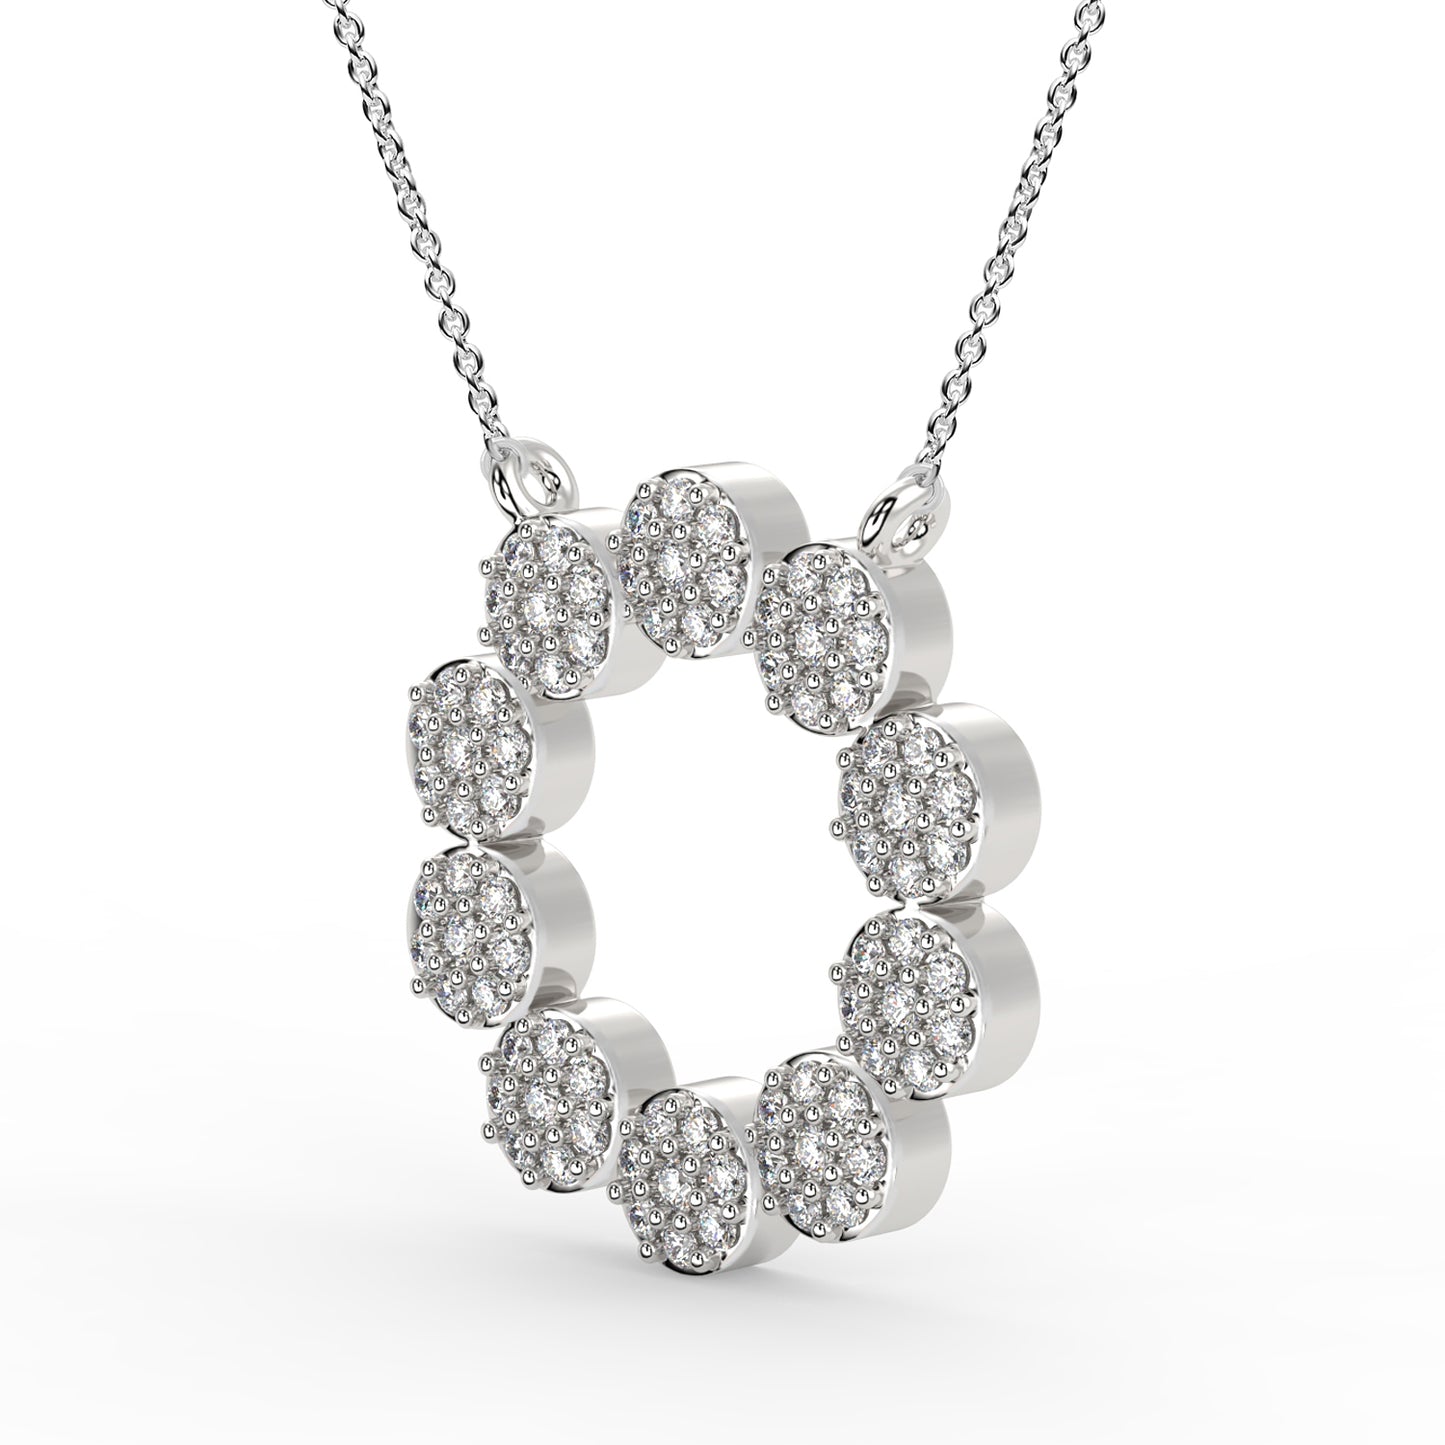 Silver & Gold Cluster Circle Necklace